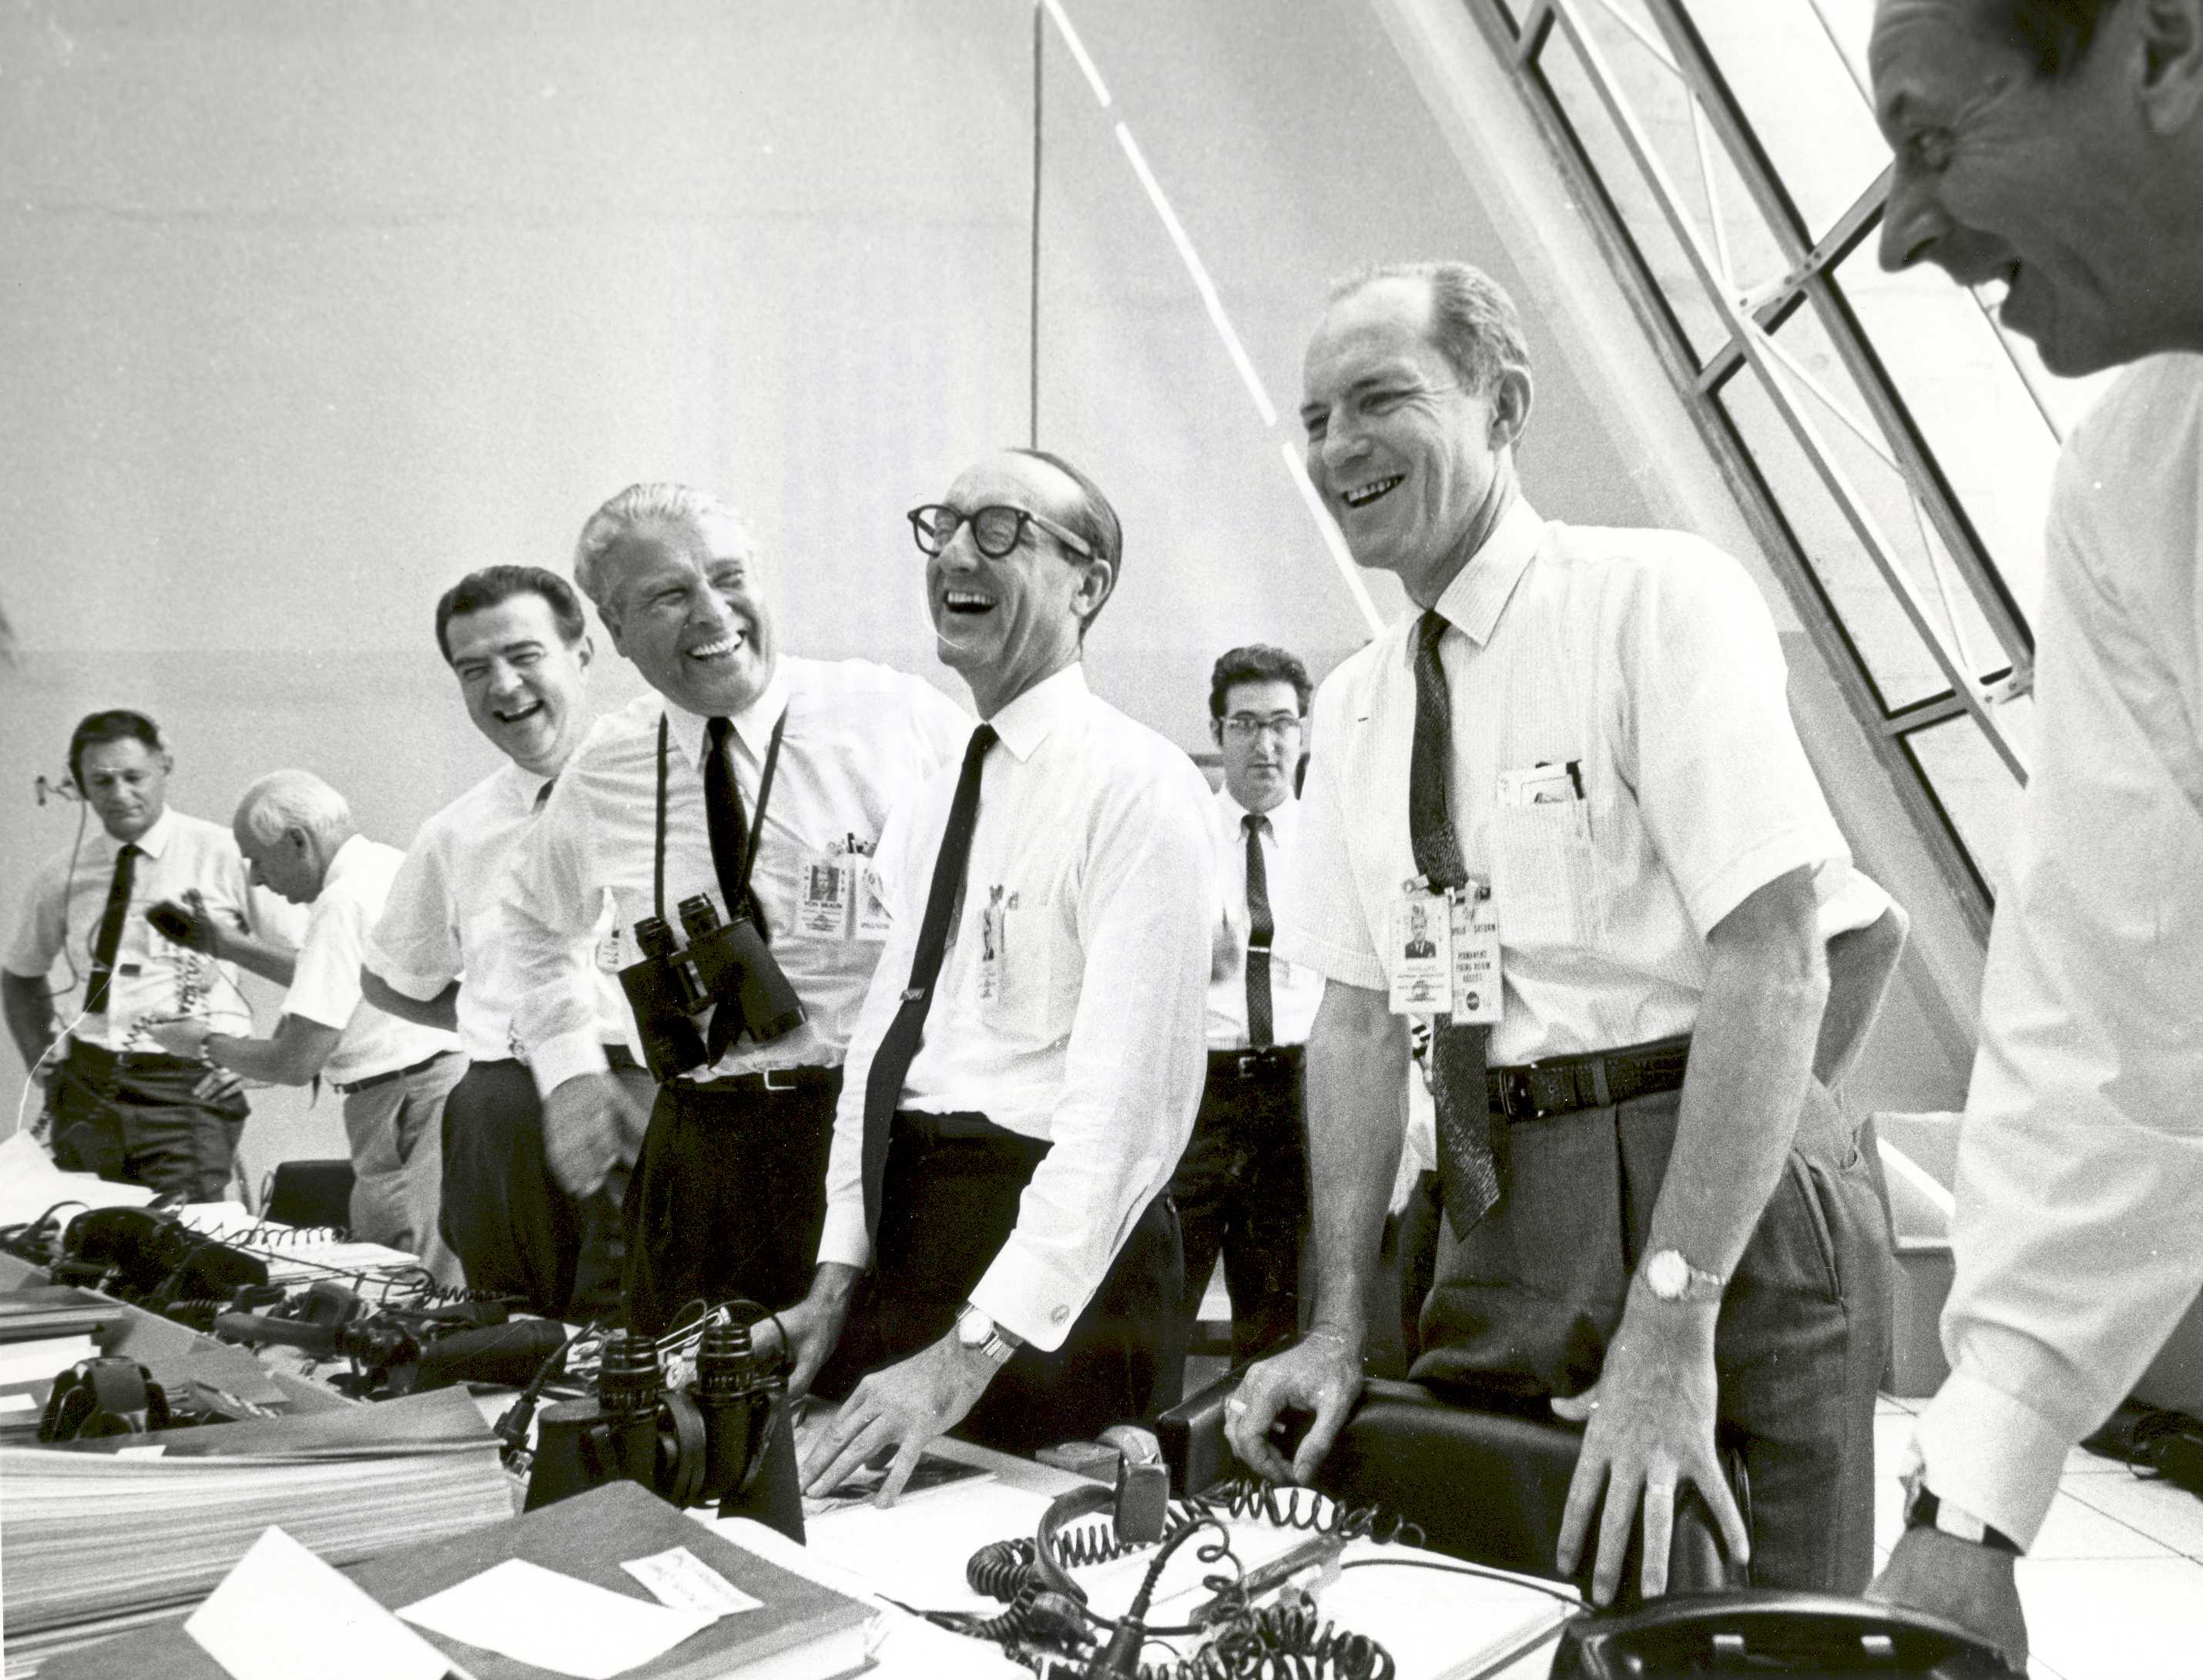 Apolo 11 - Charles W. Mathews, von Braun, George Mueller, and Lt. Gen. Samuel C. Phillips in the Launch Control Center following the successful Apollo 11 liftoff on July 16, 1969